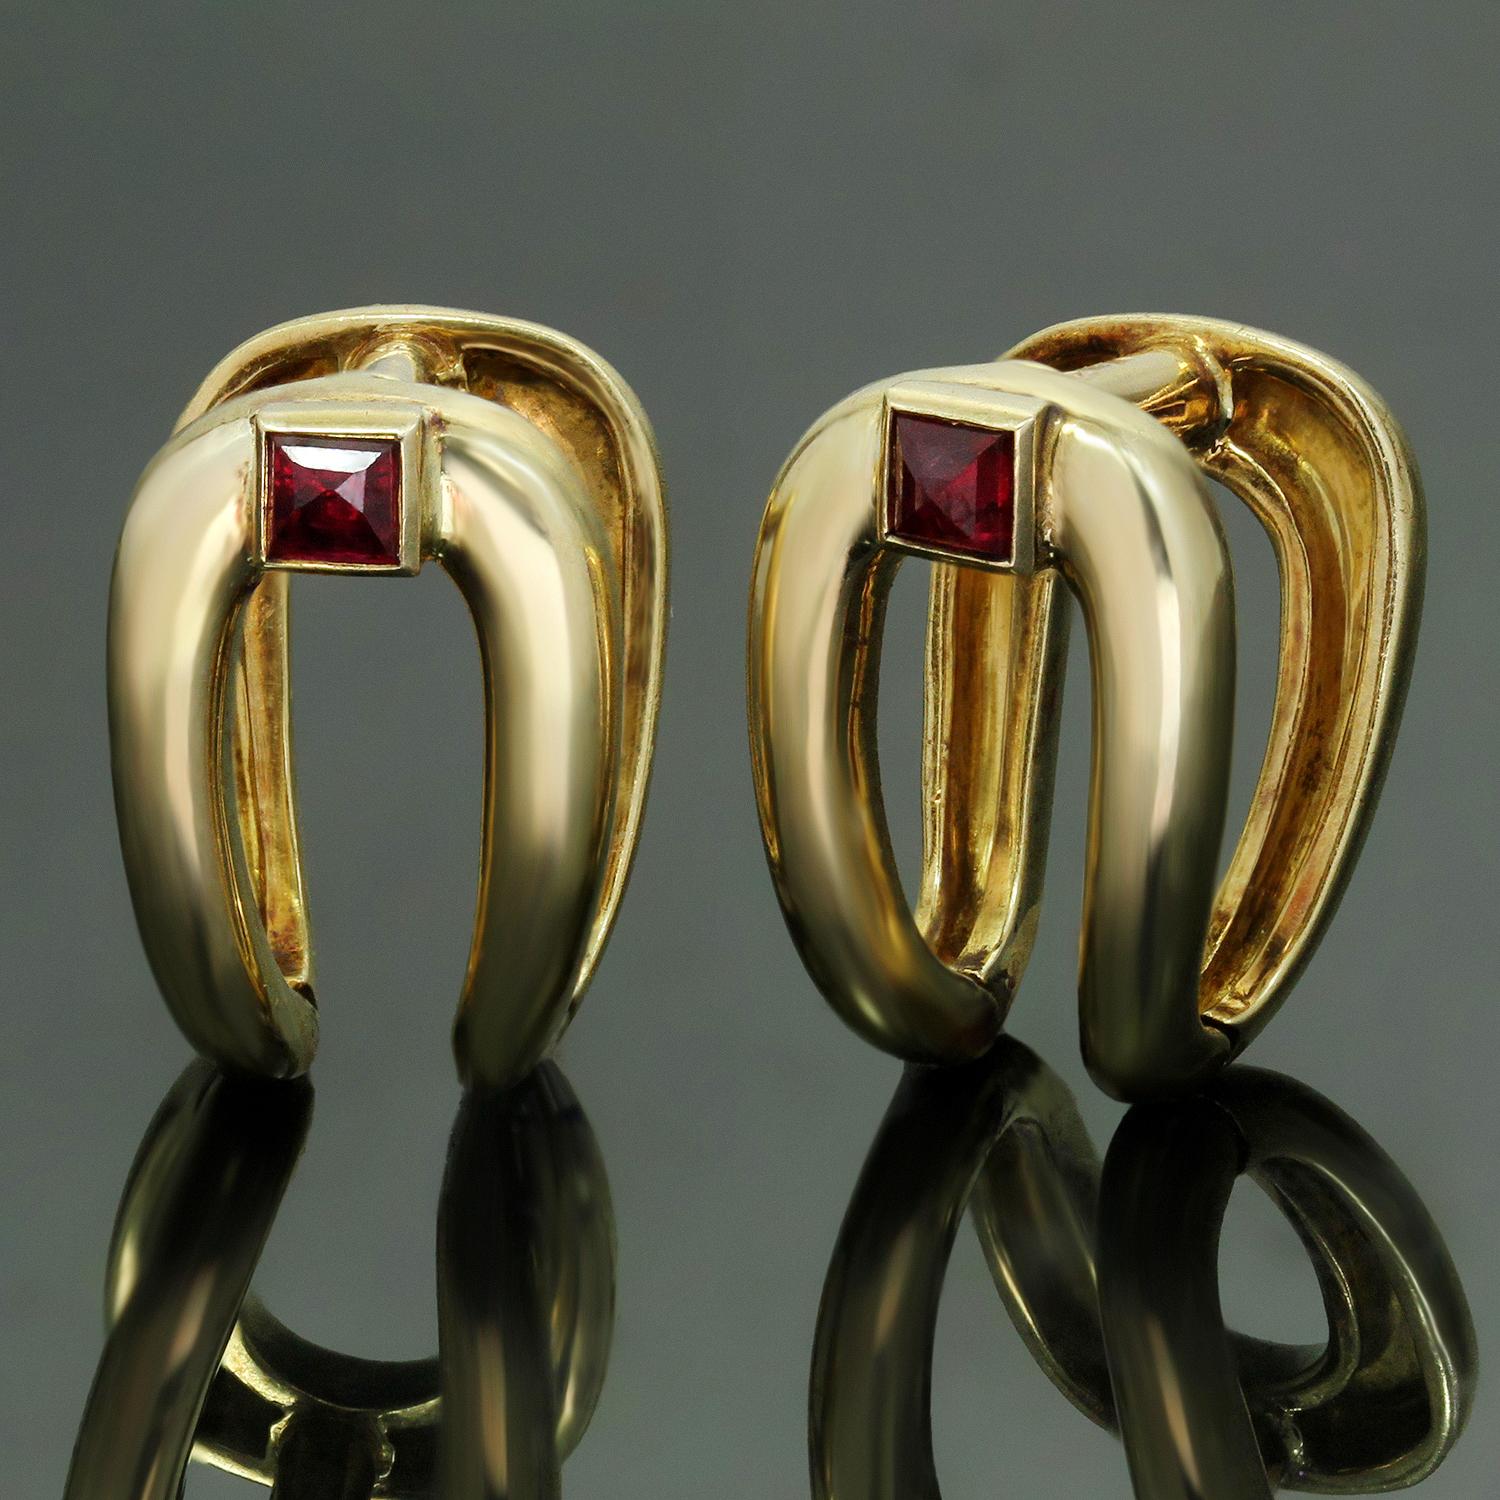 These classic retro Boucheron cufflinks are crafted in 18k yellow gold and bezel-set with French-cut square red rubies. Made in France circa 1940s. Measurements: 0.55